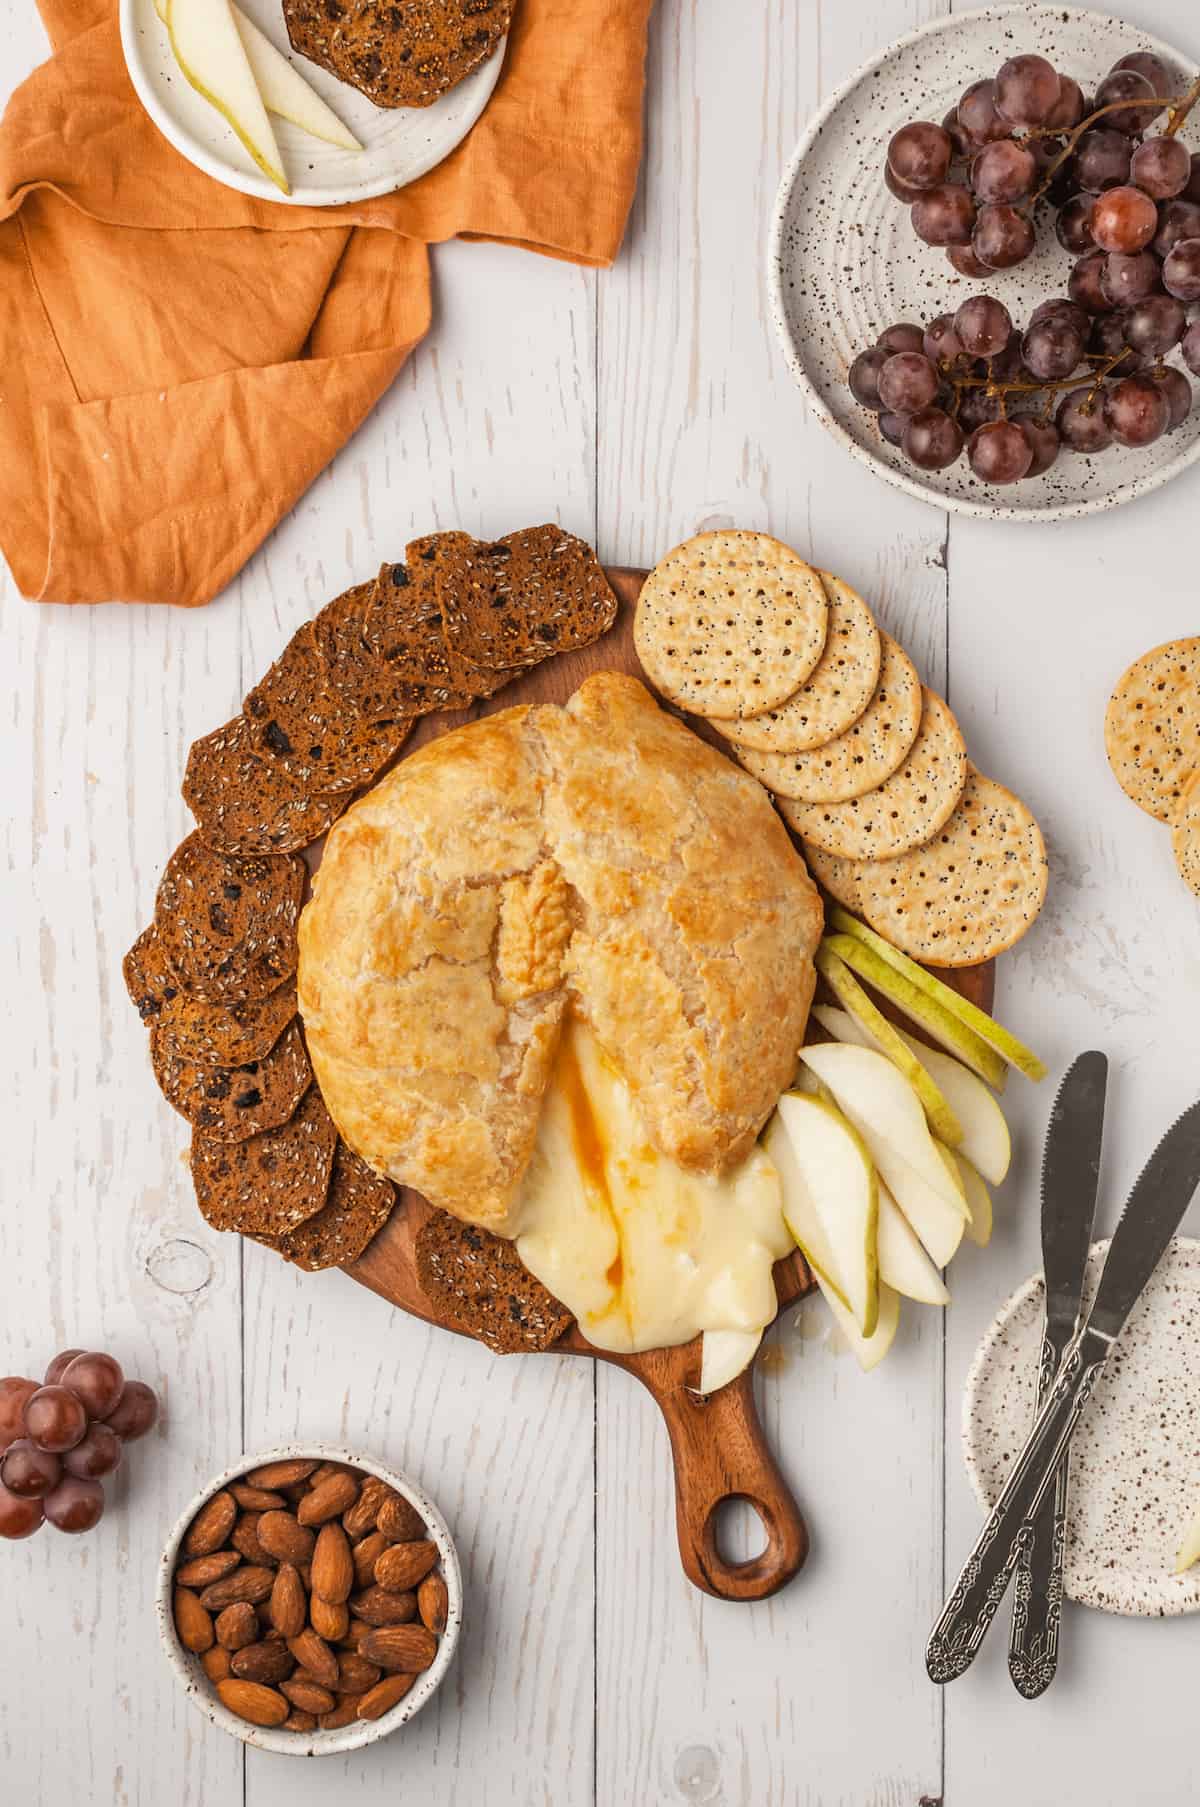 Overhead view of baked brie on board with sliced pears and crackers